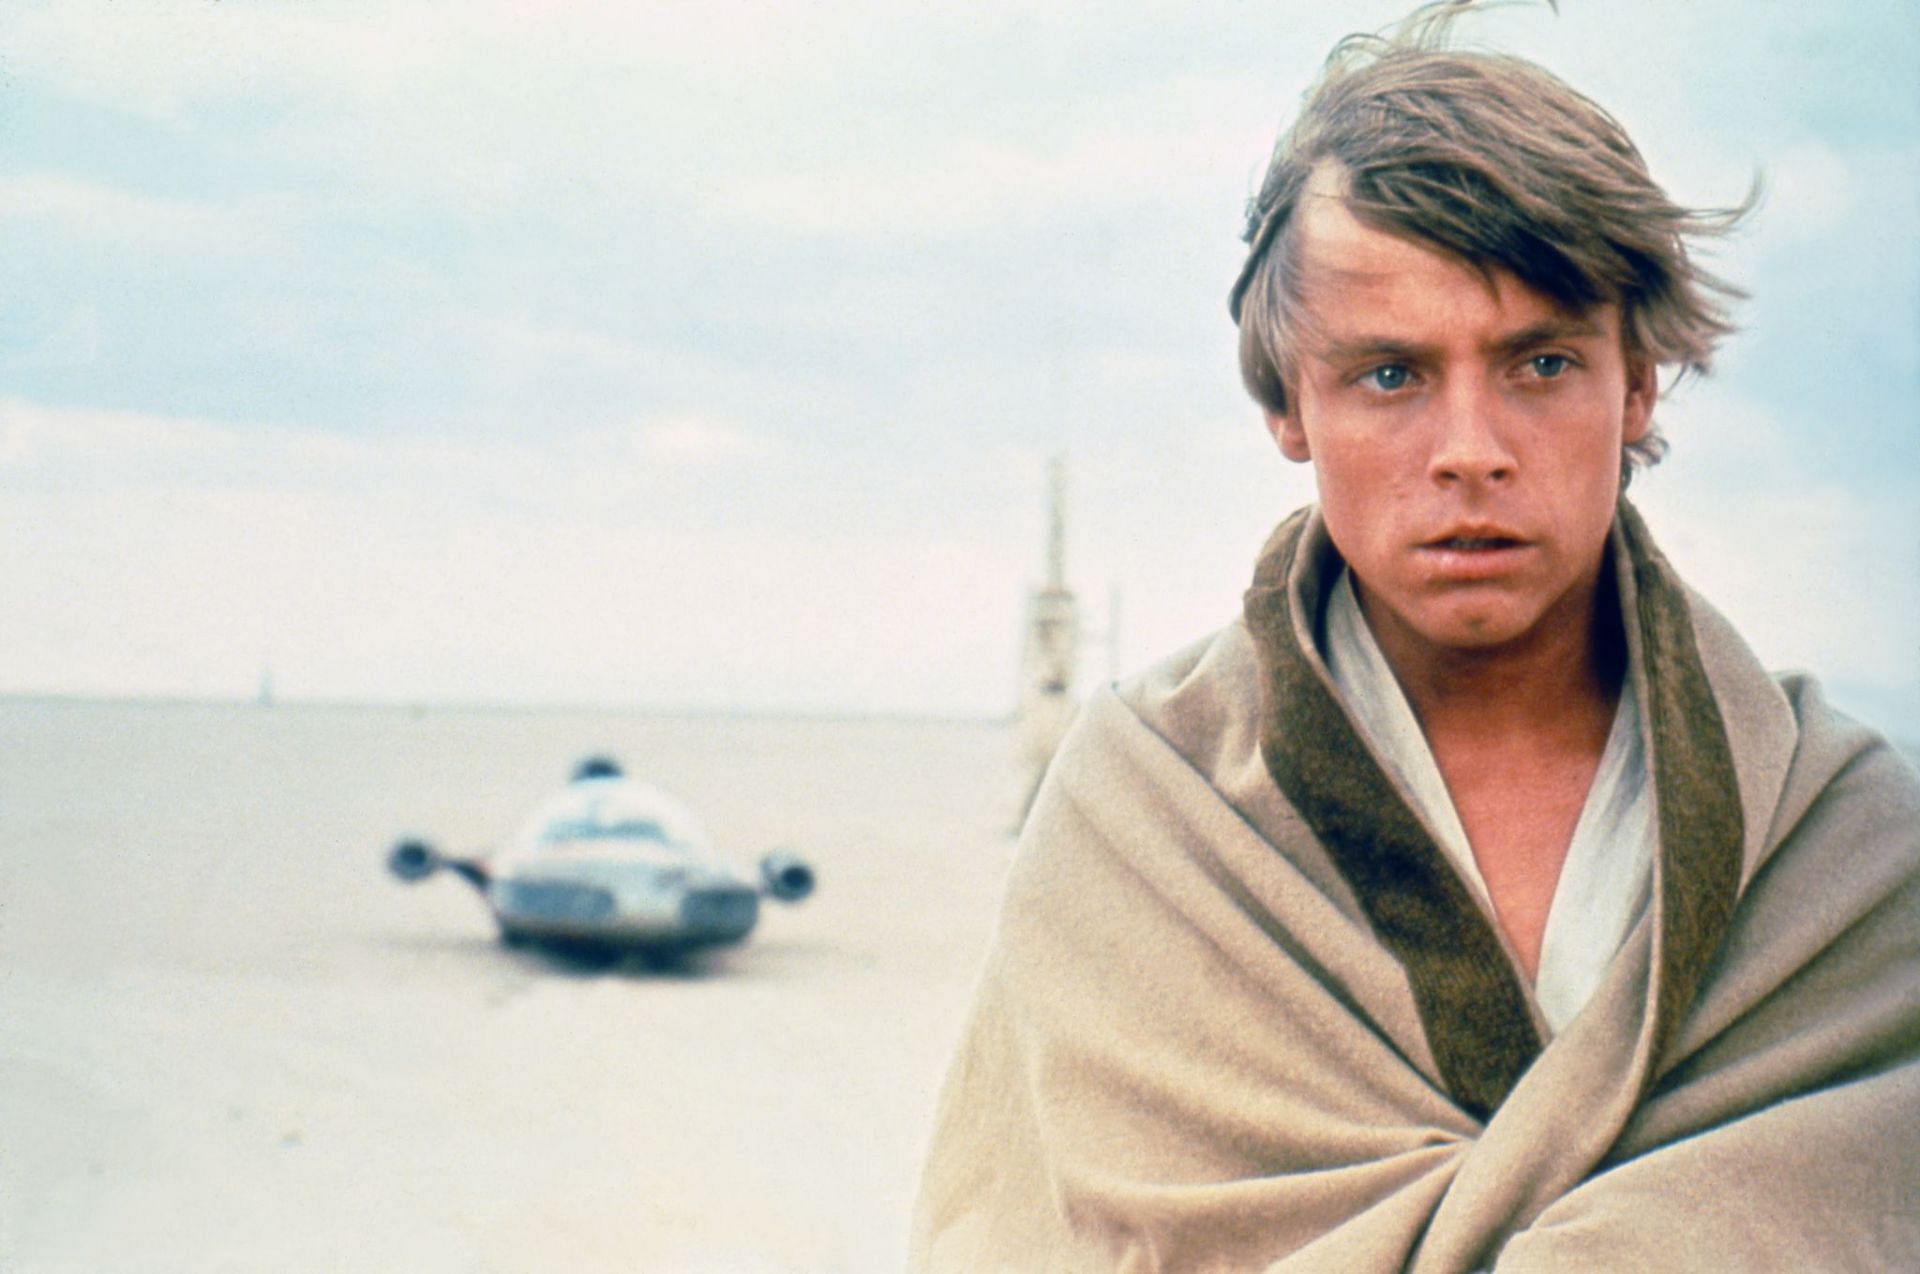 Relive the most iconic moments of Luke Skywalker